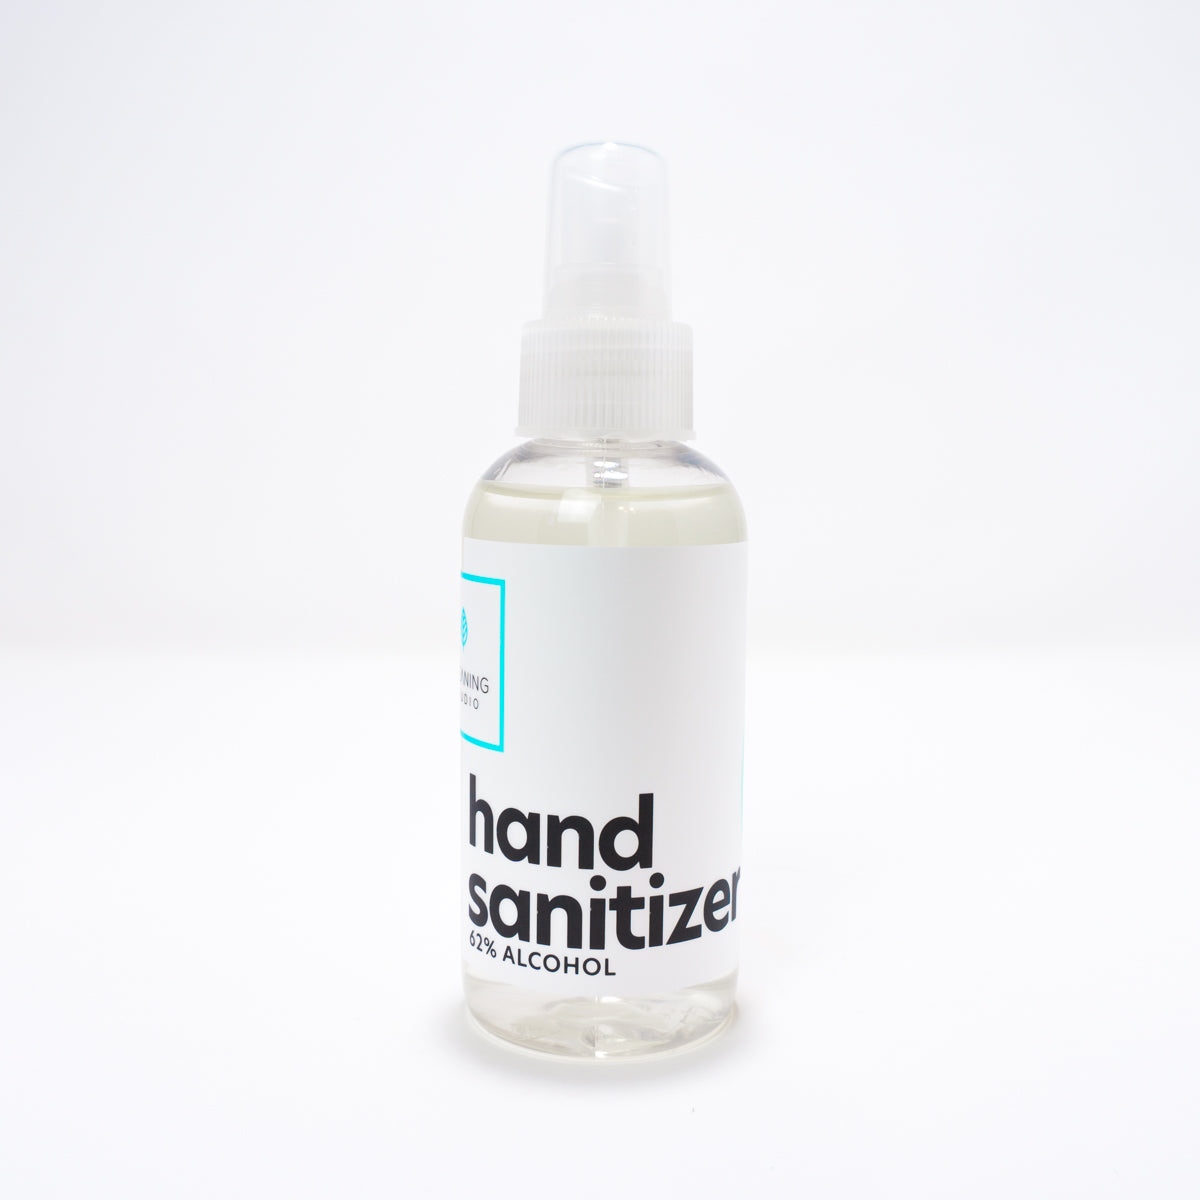 Hand Sanitizers